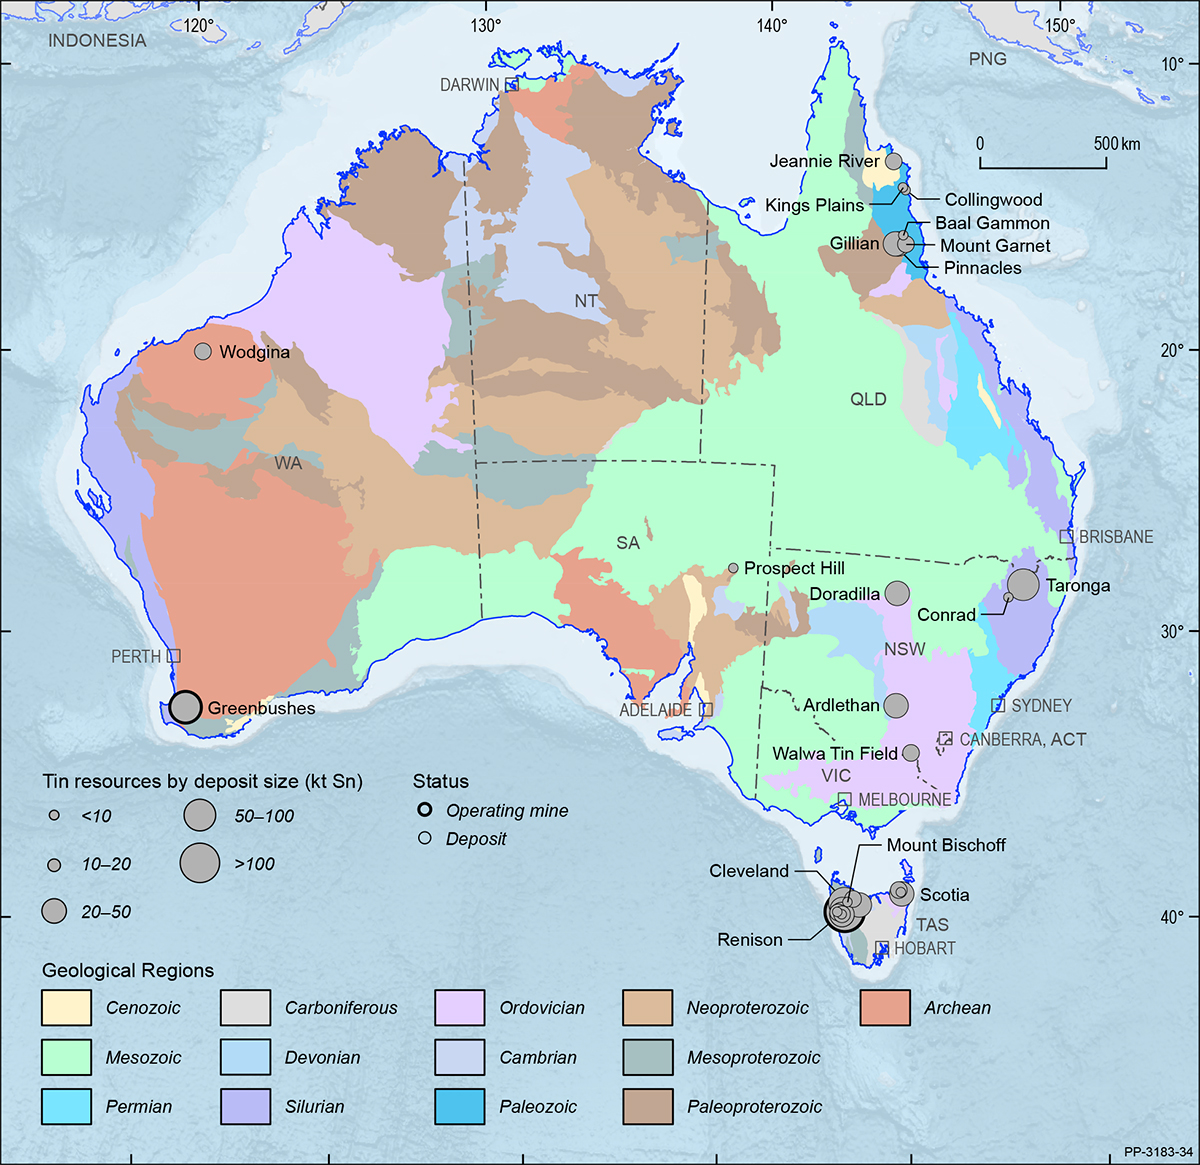 A map showing the Australian continent shaded by the ages of the main geological provinces highlighting the geographical distribution of Australian tin deposits and operating mines in 2019.